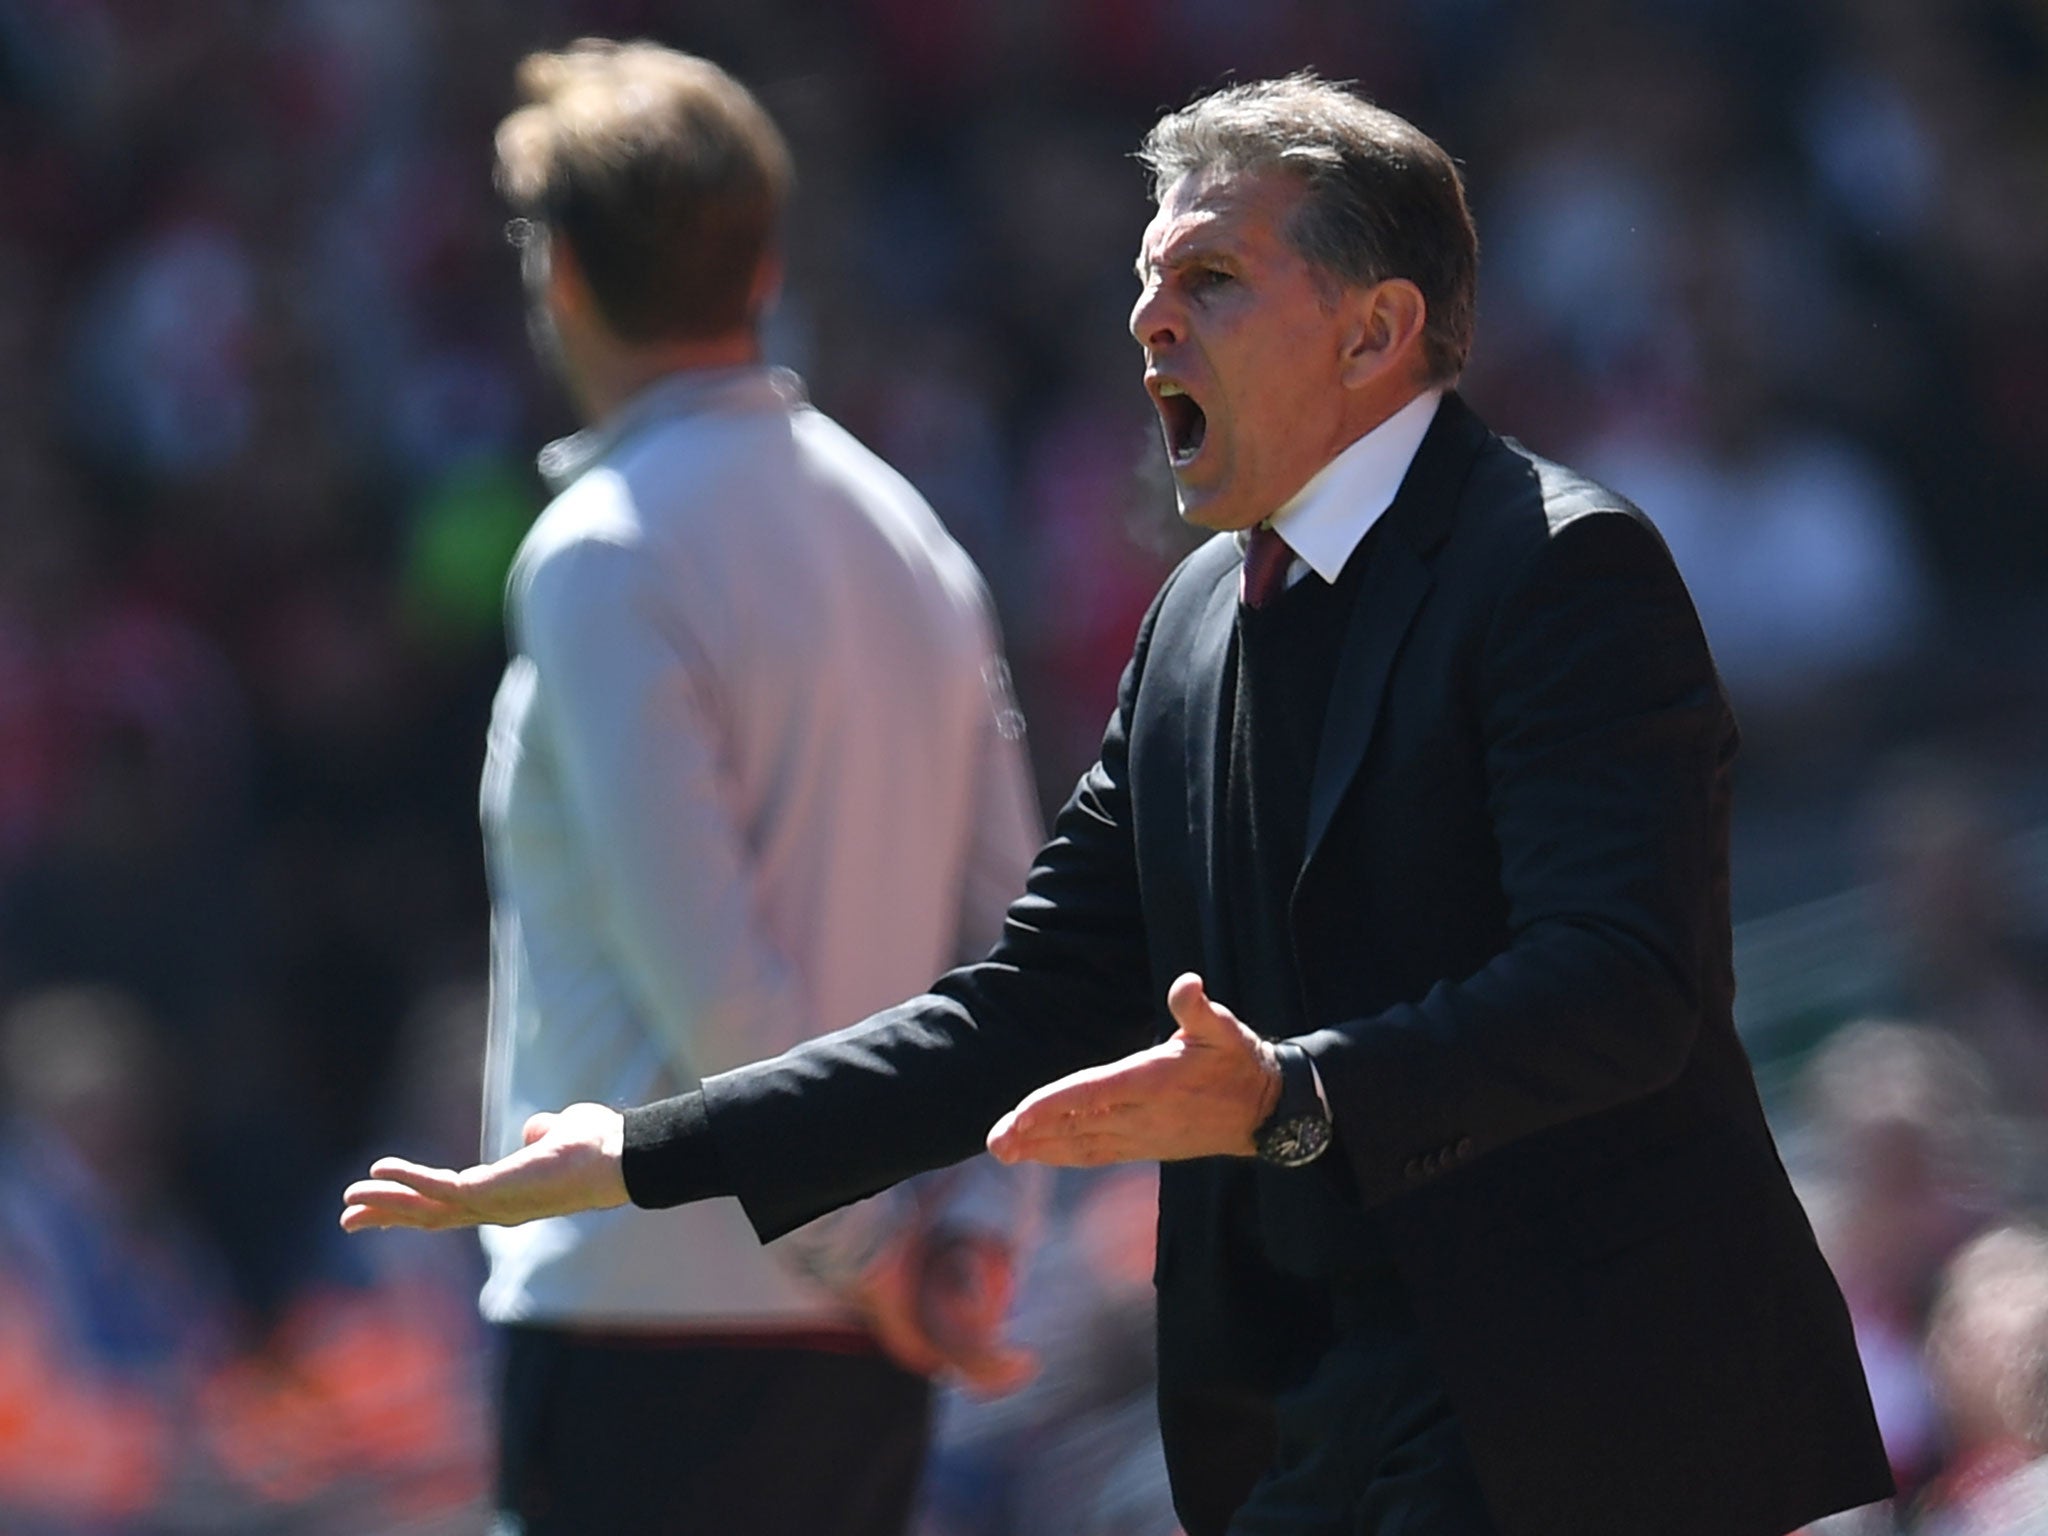 Puel is unlikely to keep his job at St. Mary's